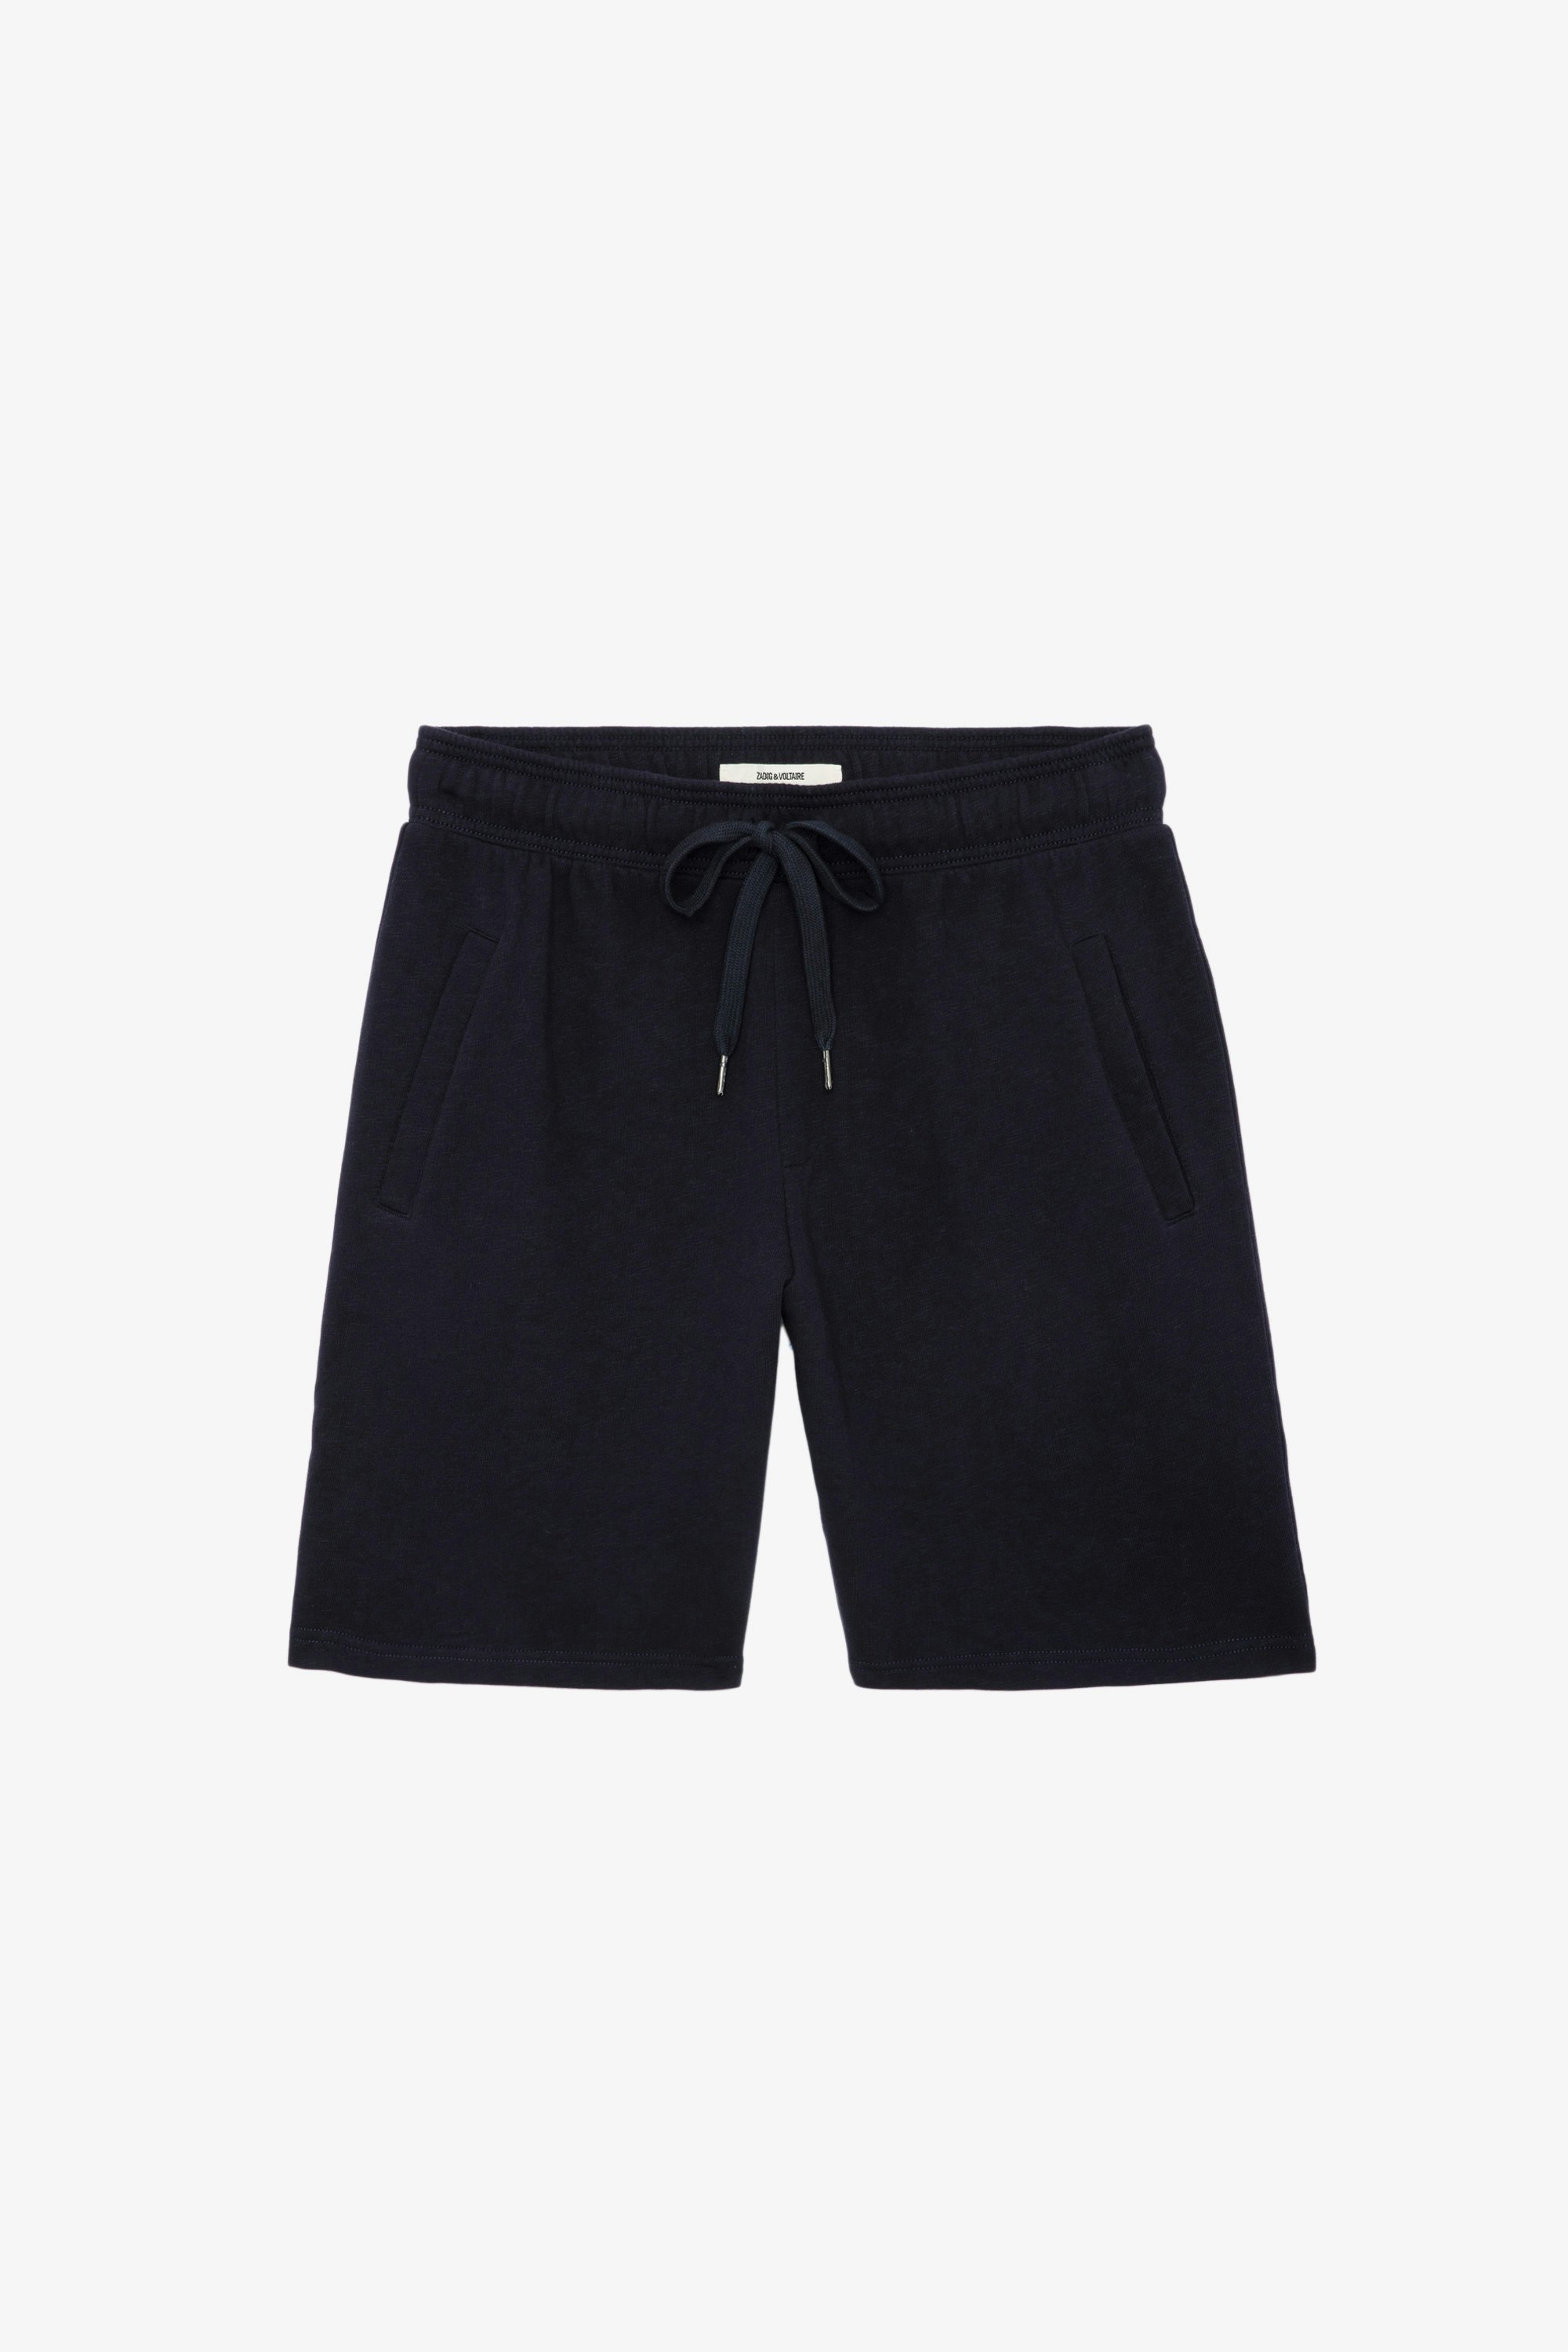 Party Shorts - Navy blue cotton fleece shorts with pockets and Studio patch on the back.